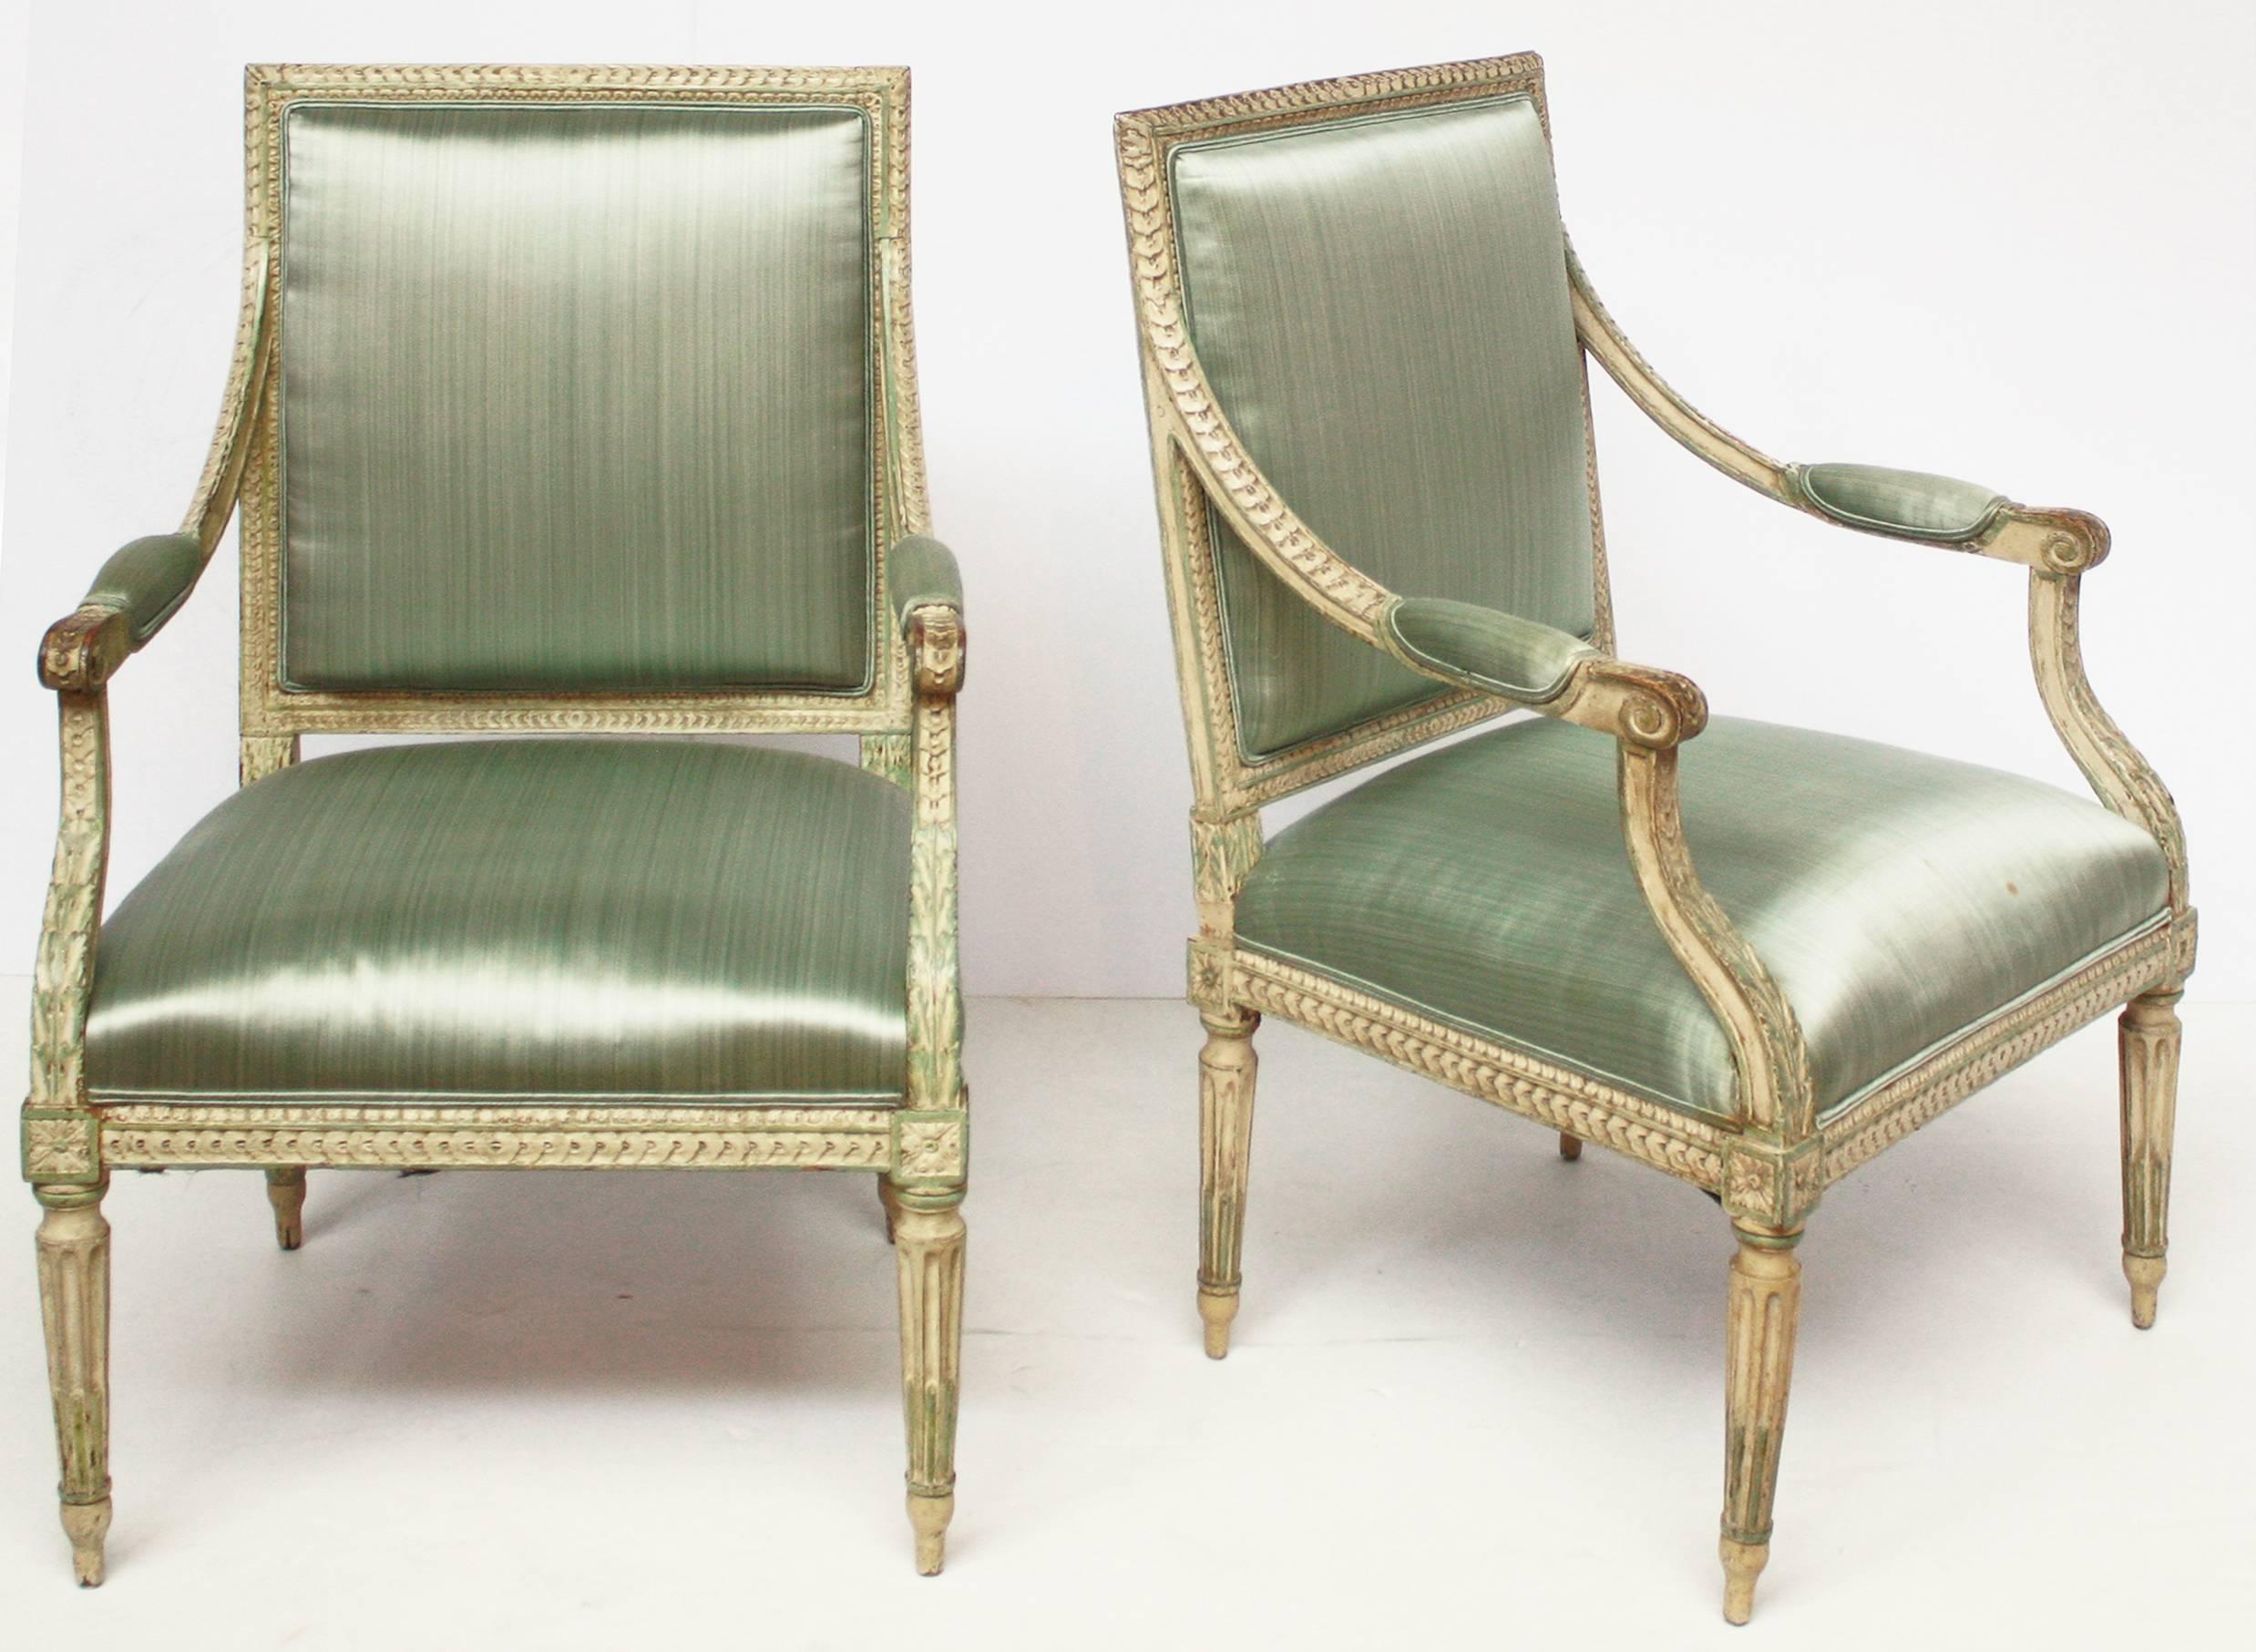 A group of four carved and painted open-armchairs / fauteuils, Louis XVI / neoclassical, circa 1790, with mint green-blue silk upholstery.Possibly Swedish

$5,850.00 per pair. Will sell as pairs.

